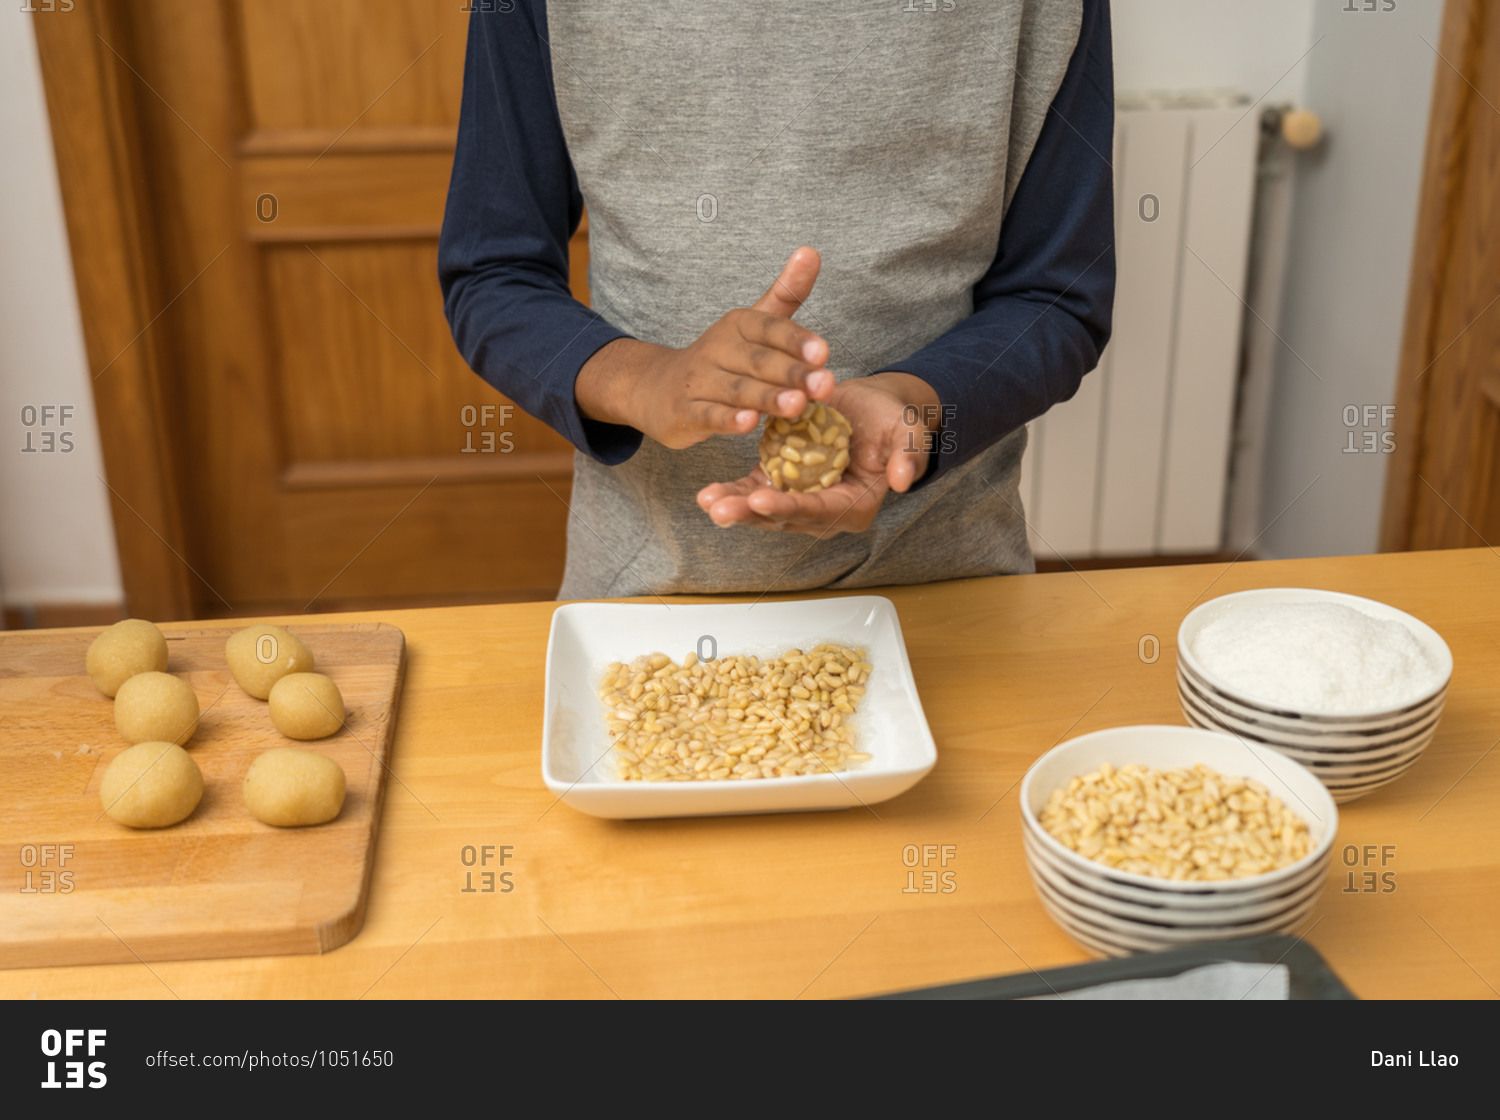 An unrecognizable African-American child shaping a round cookie made with ground almonds, grated coconut and pine nuts (panellets)